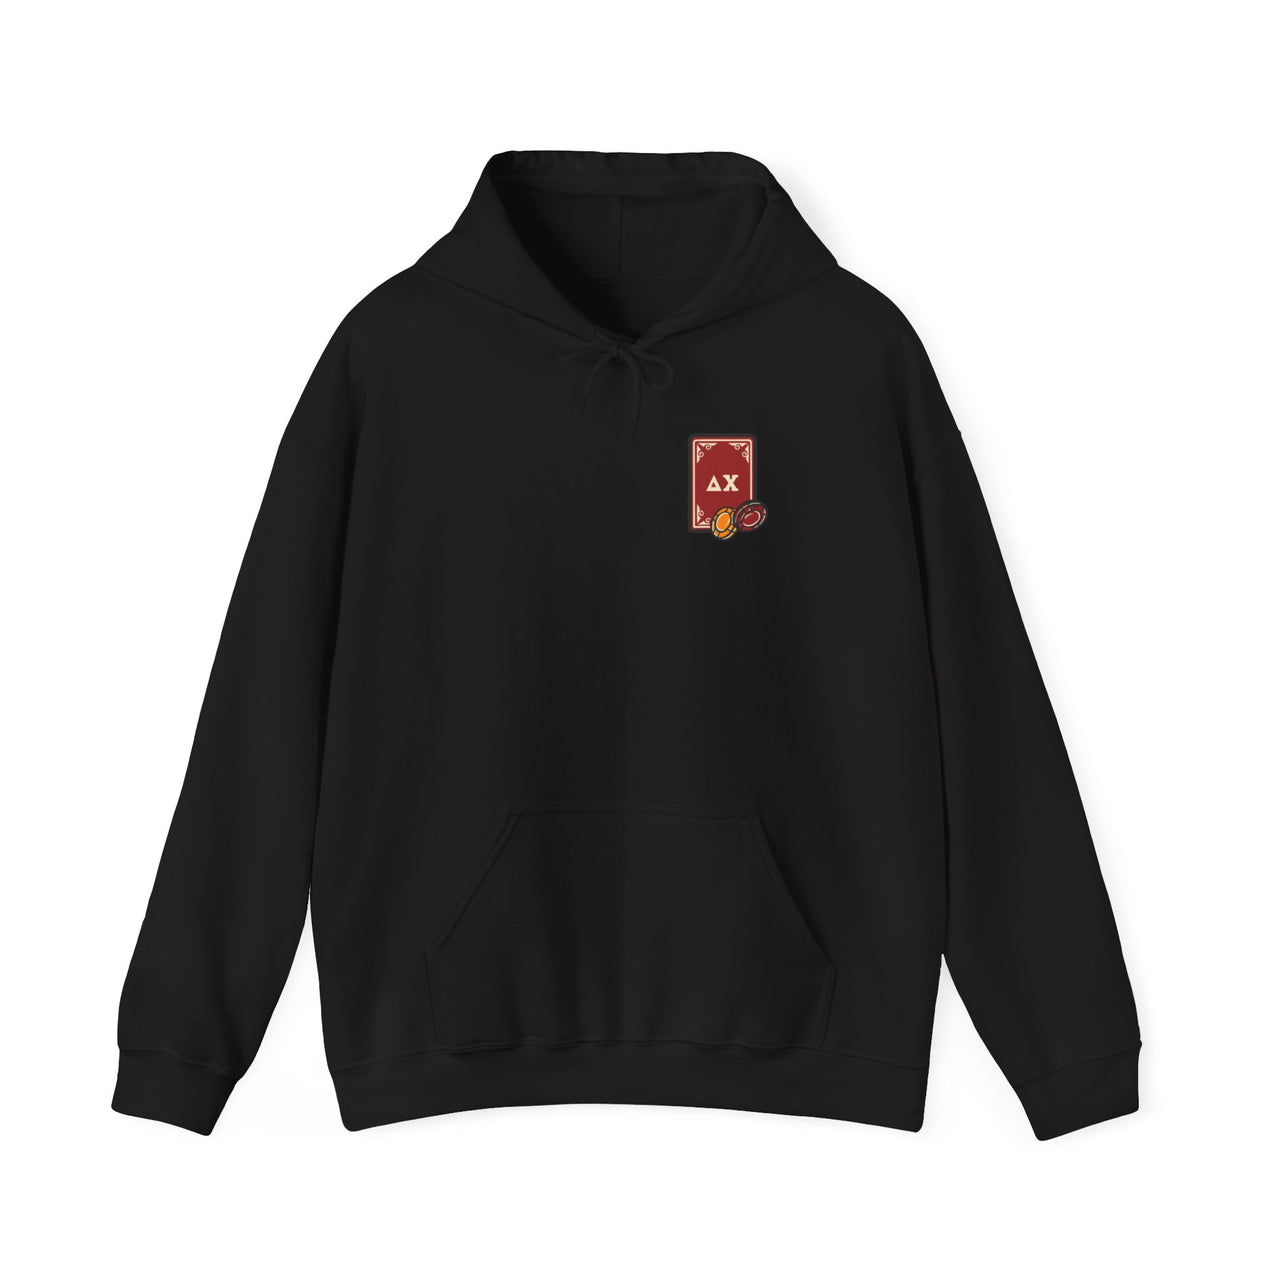 Delta Chi Graphic Hoodie | Play Your Odds